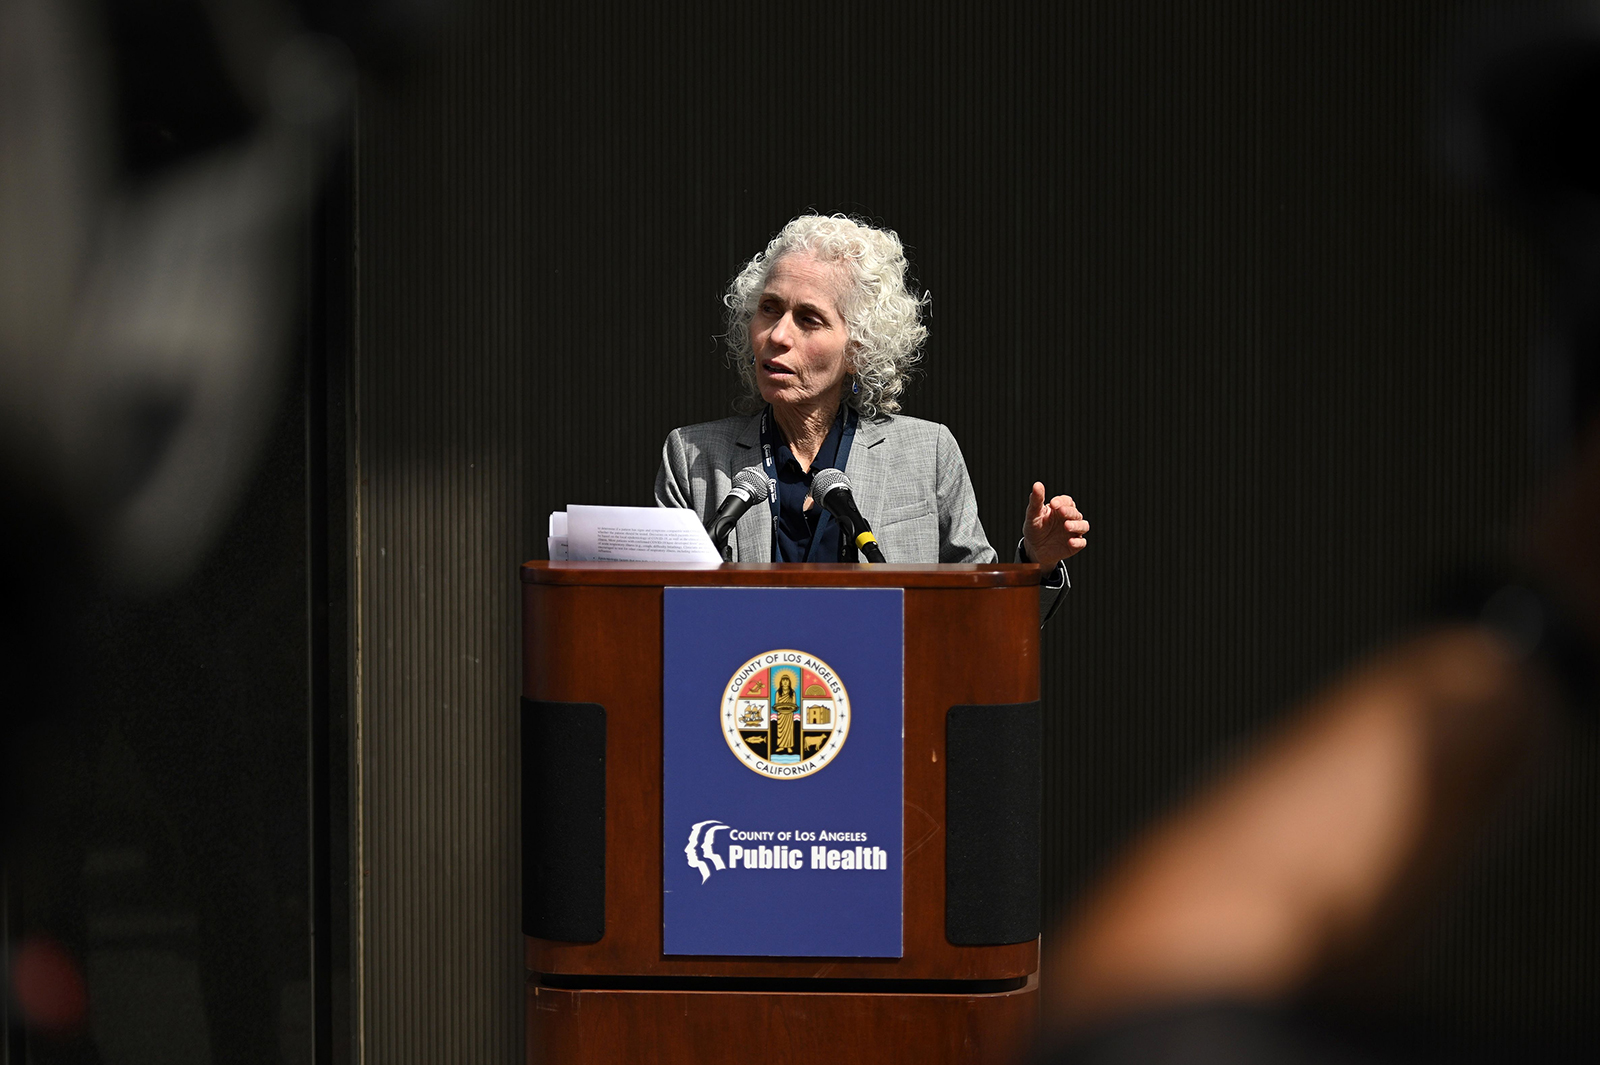 Los Angeles County Public Health director Barbara Ferrer speaks at a press conference on the novel COVID-19 in Los Angeles, California on March 6.